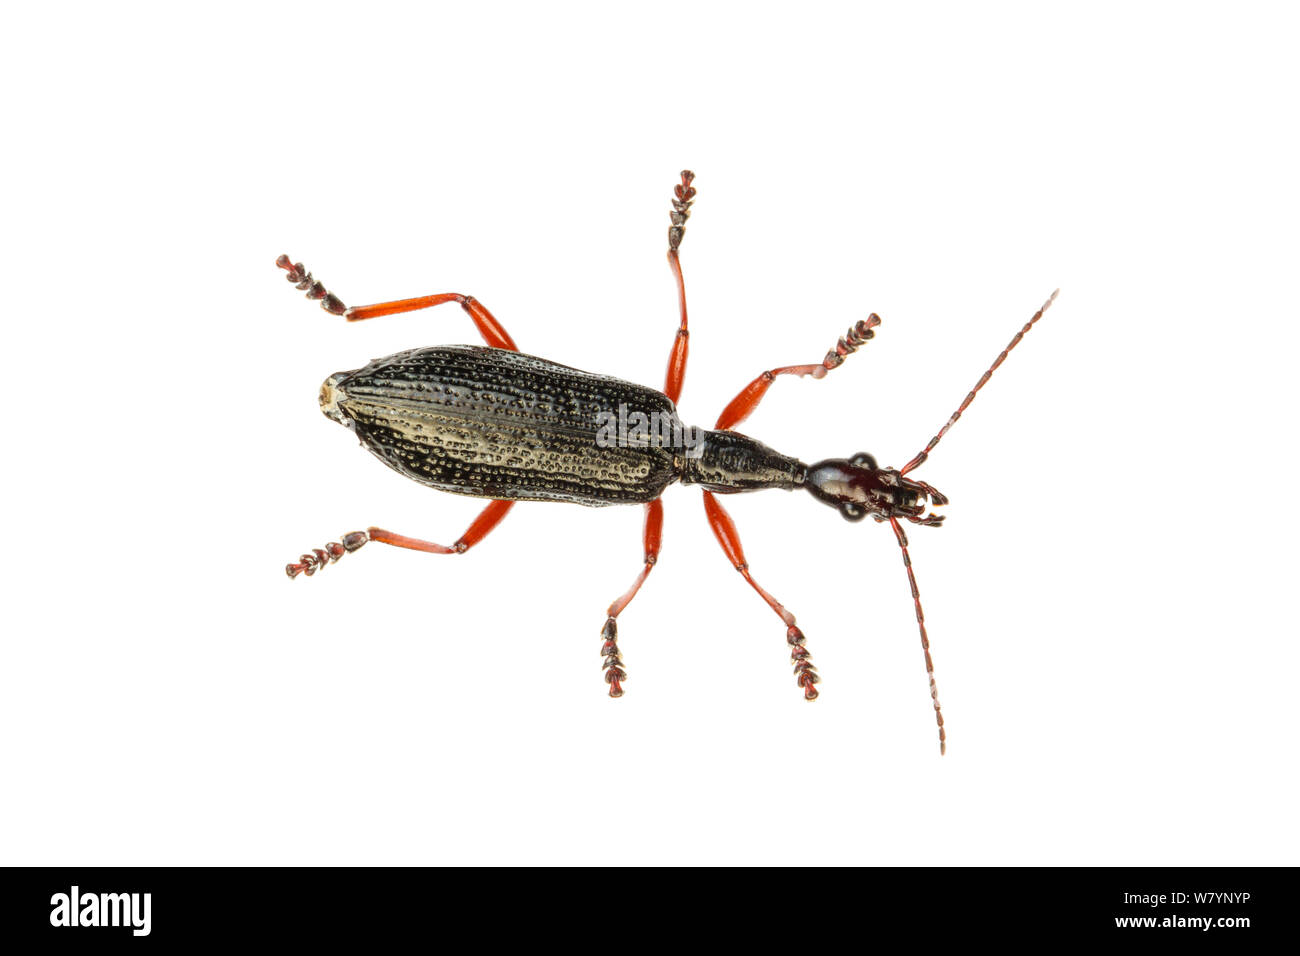 Ground beetle (Agra sp), Caves Branch, Cayo District, Belize, September. meetyourneighbours.net project Stock Photo